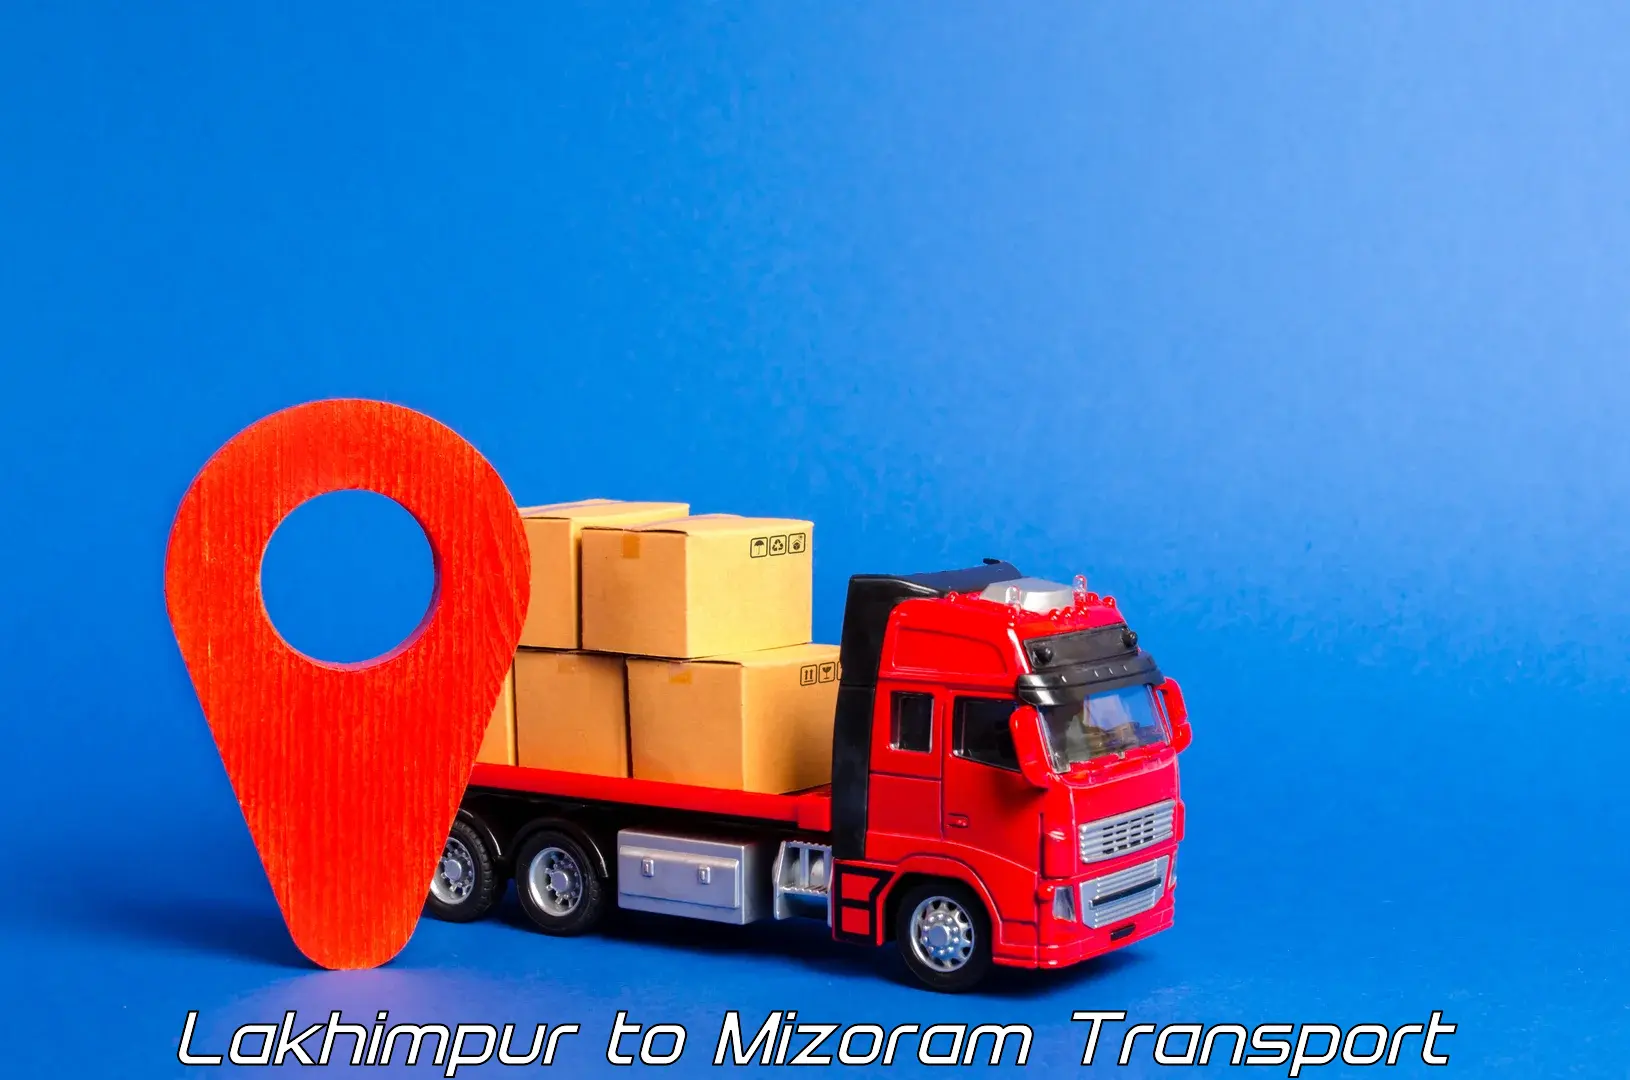 Container transport service Lakhimpur to Lawngtlai